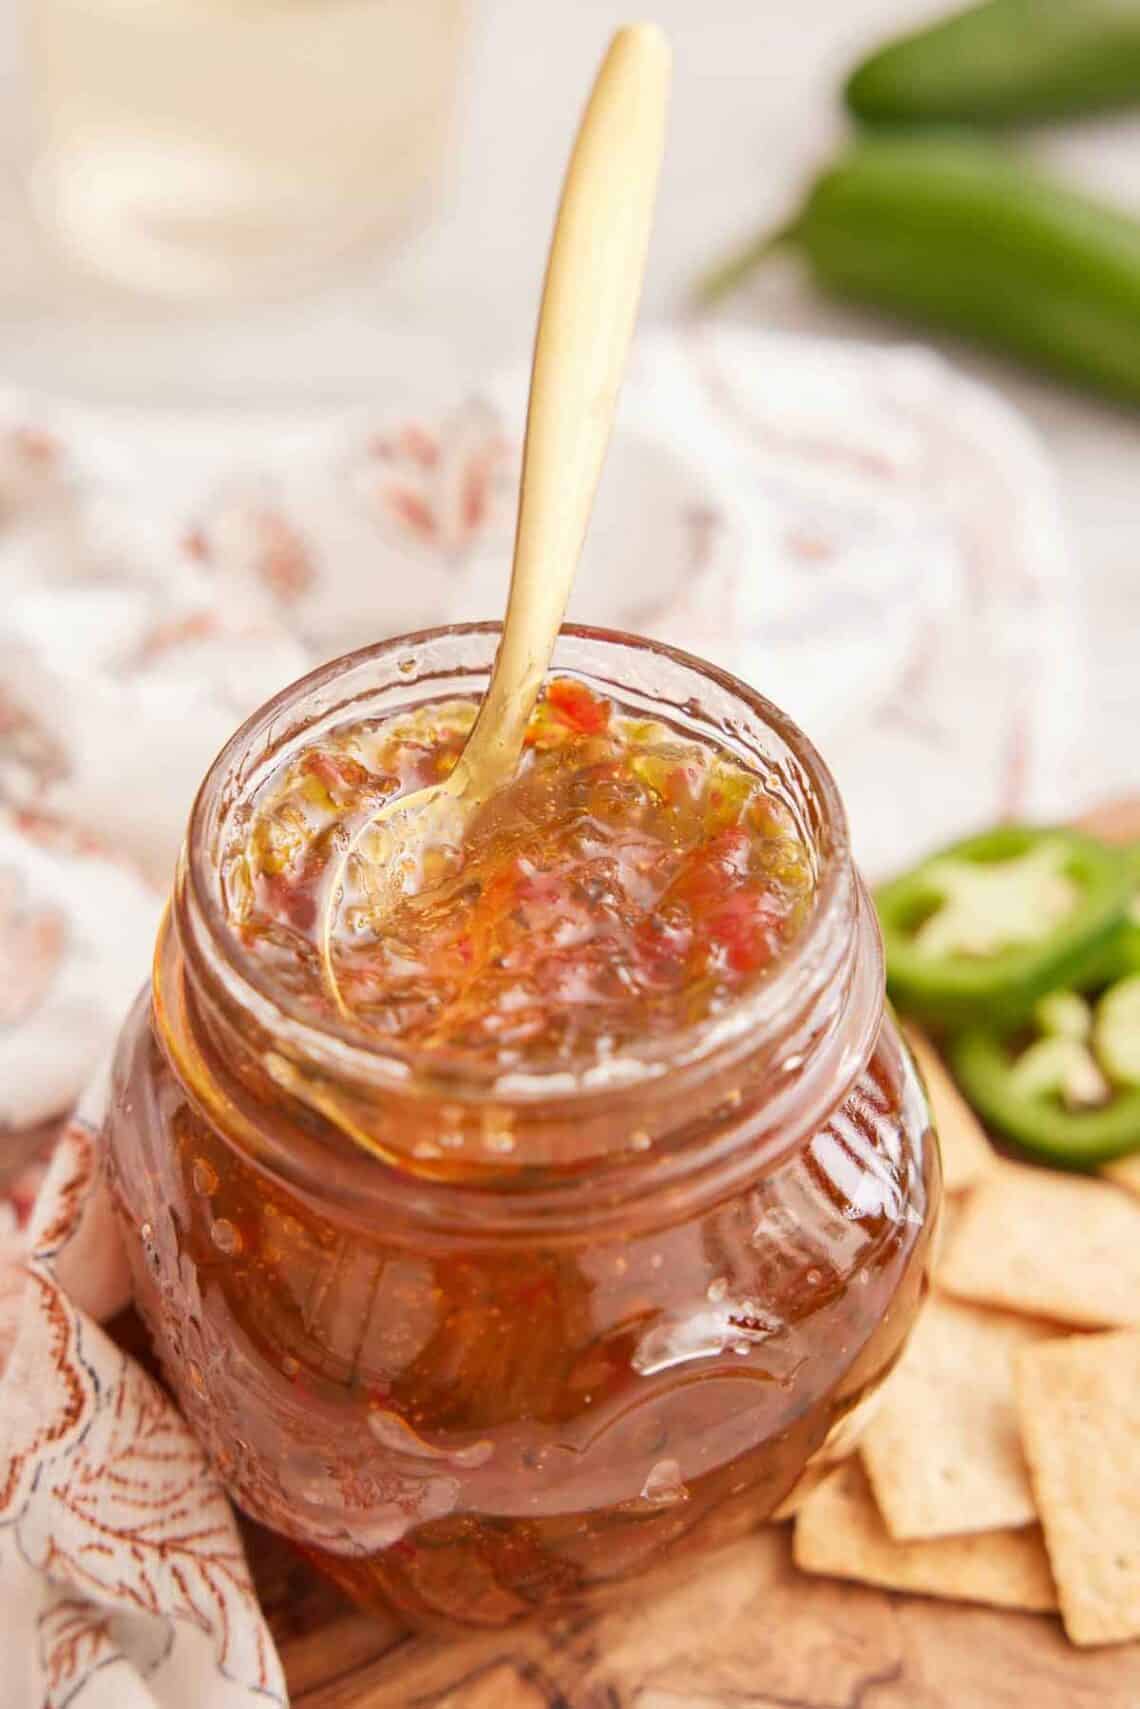 A jar of jalapeno jelly with a golden spoon inserted.